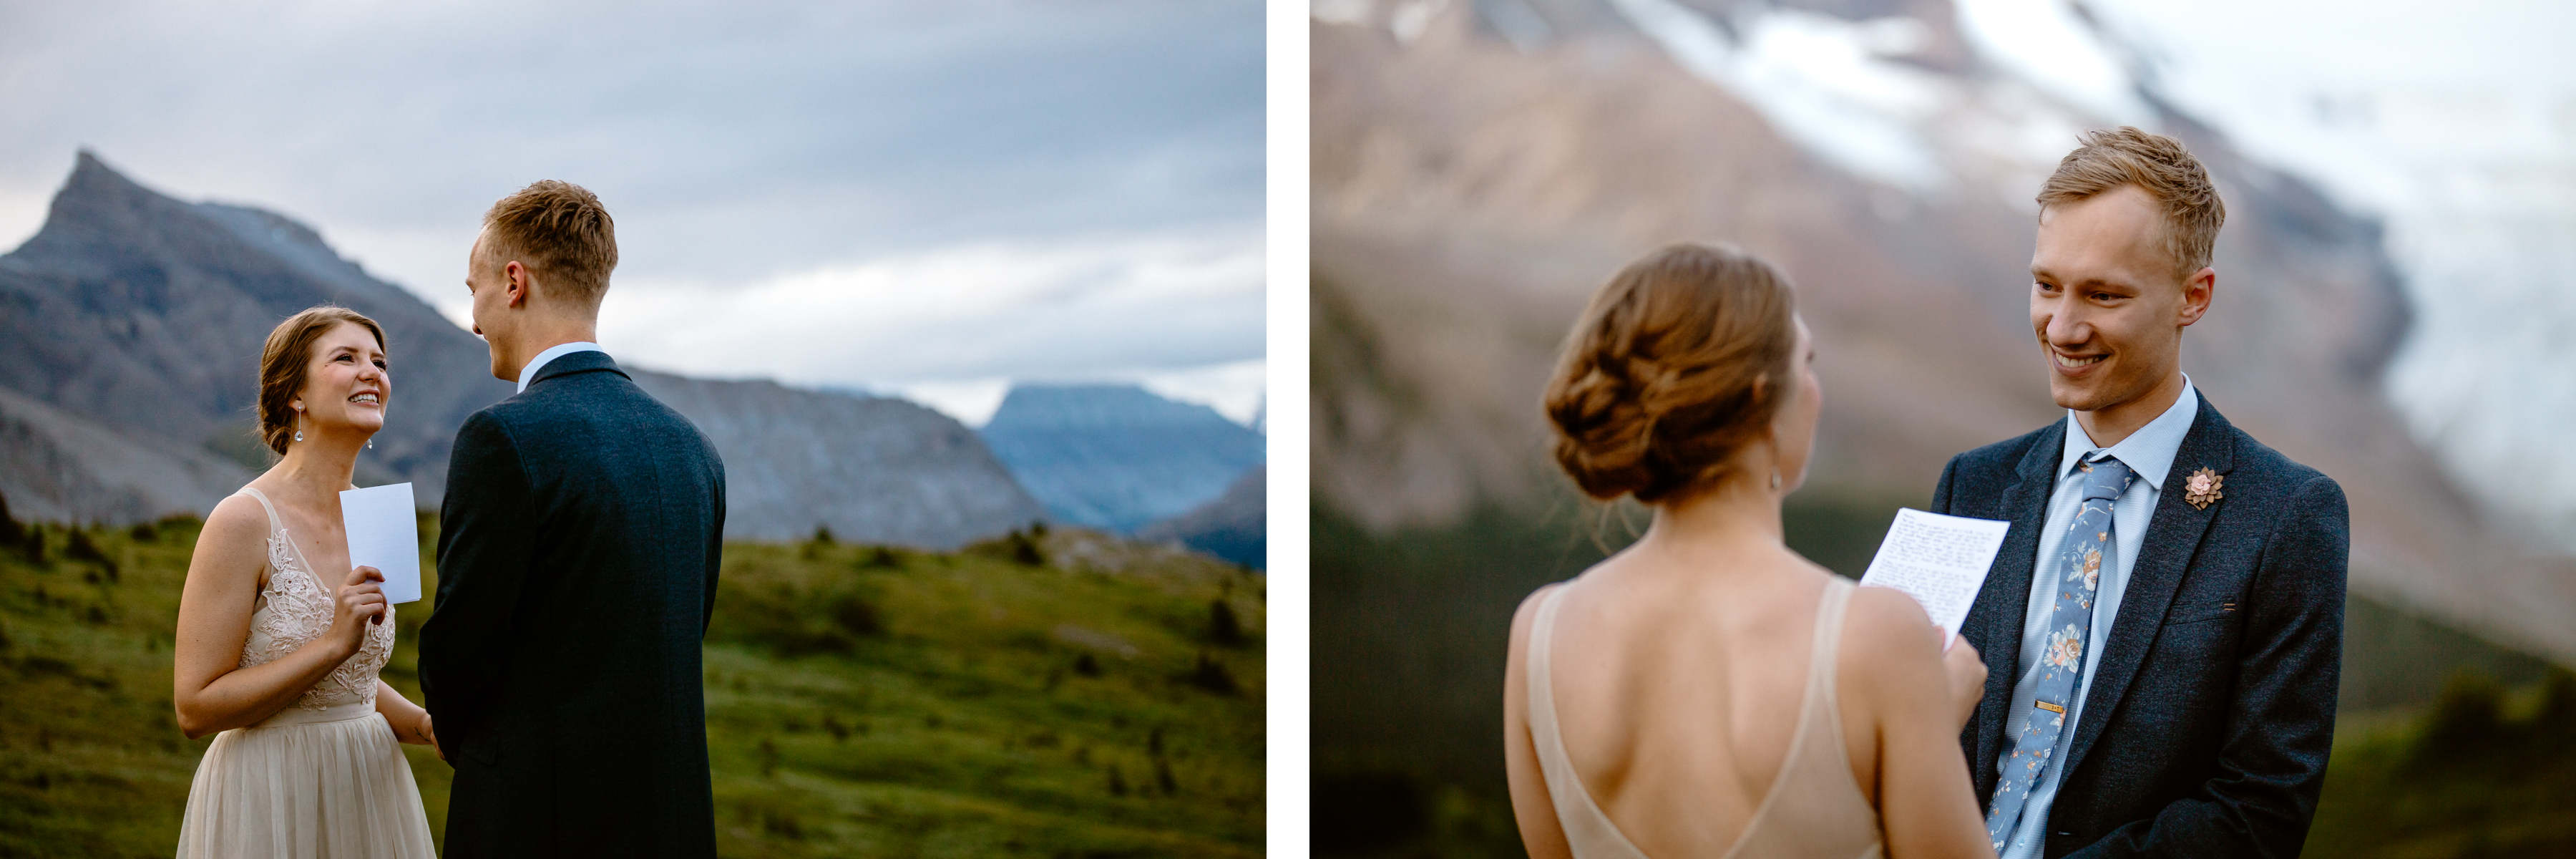 Hiking Elopement Photographers in Banff National Park - Photo 12